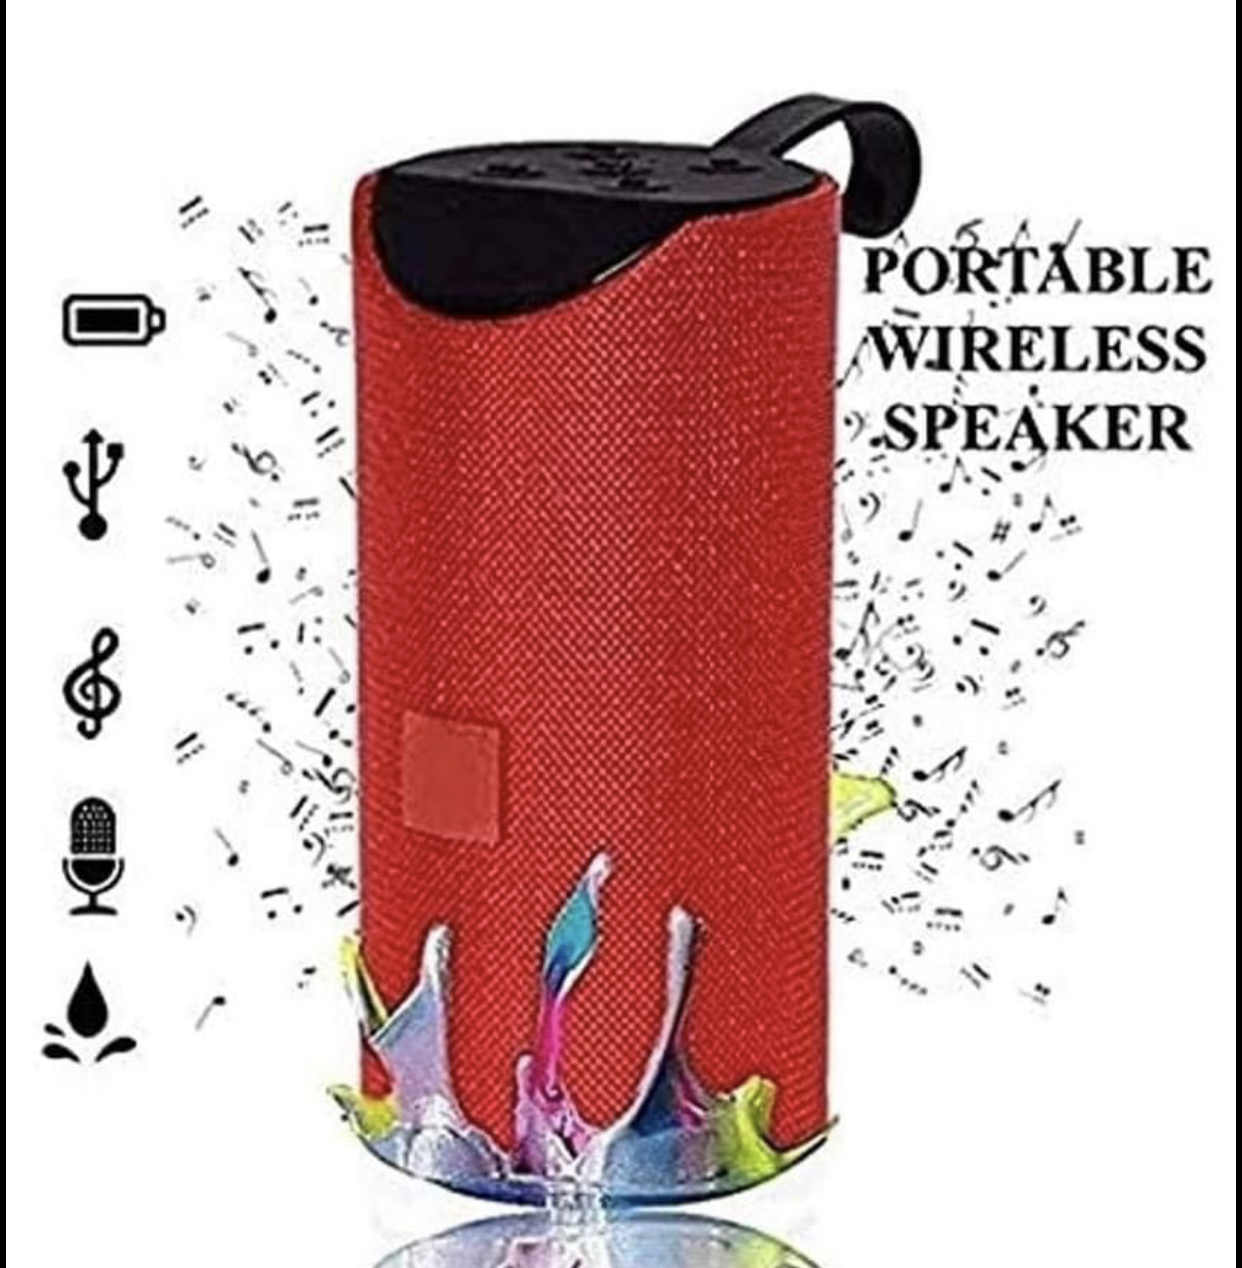  Portable Bluetooth Speaker Package Contains: 1 piece of Portable 